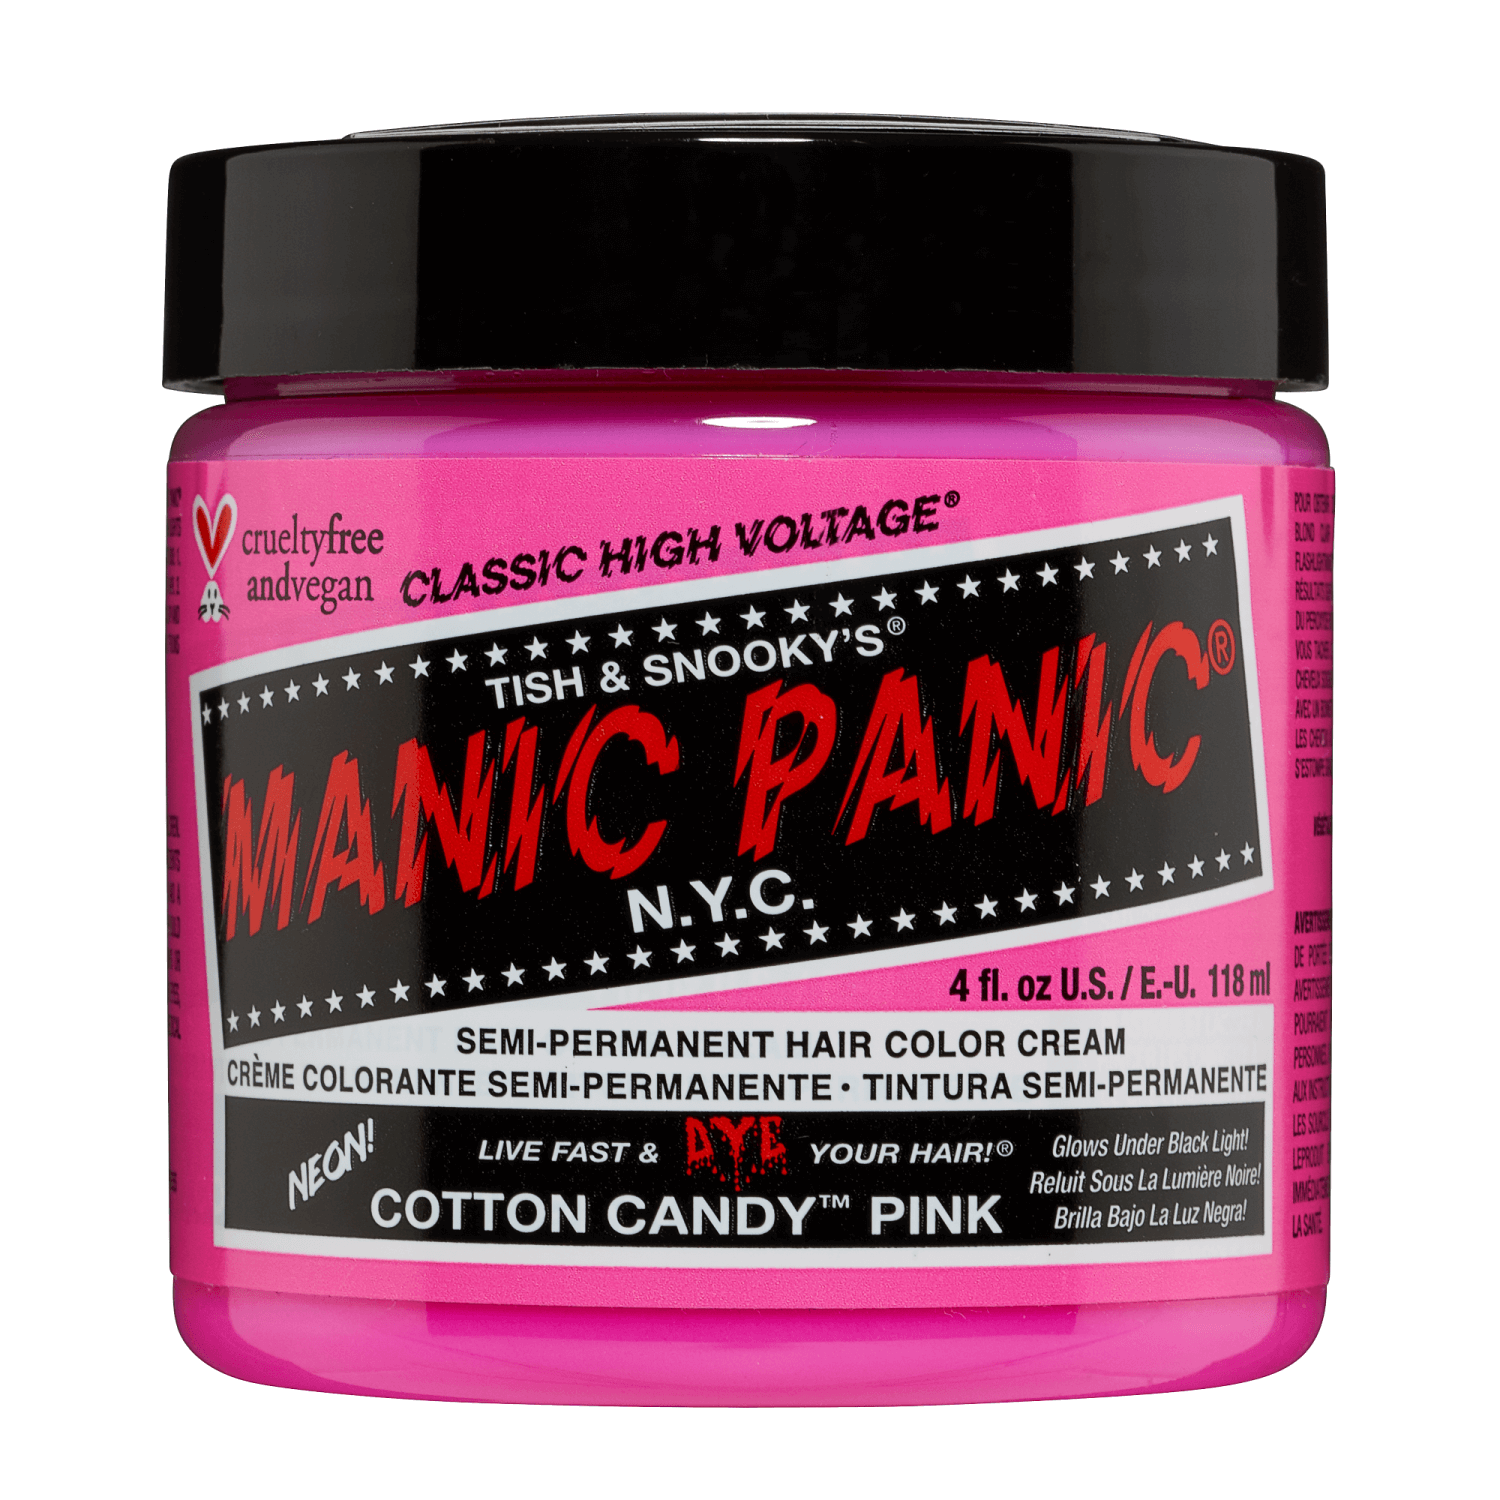 cotton-candy-pink-manic-panic-semi-permanent-hair-color-sally-beauty